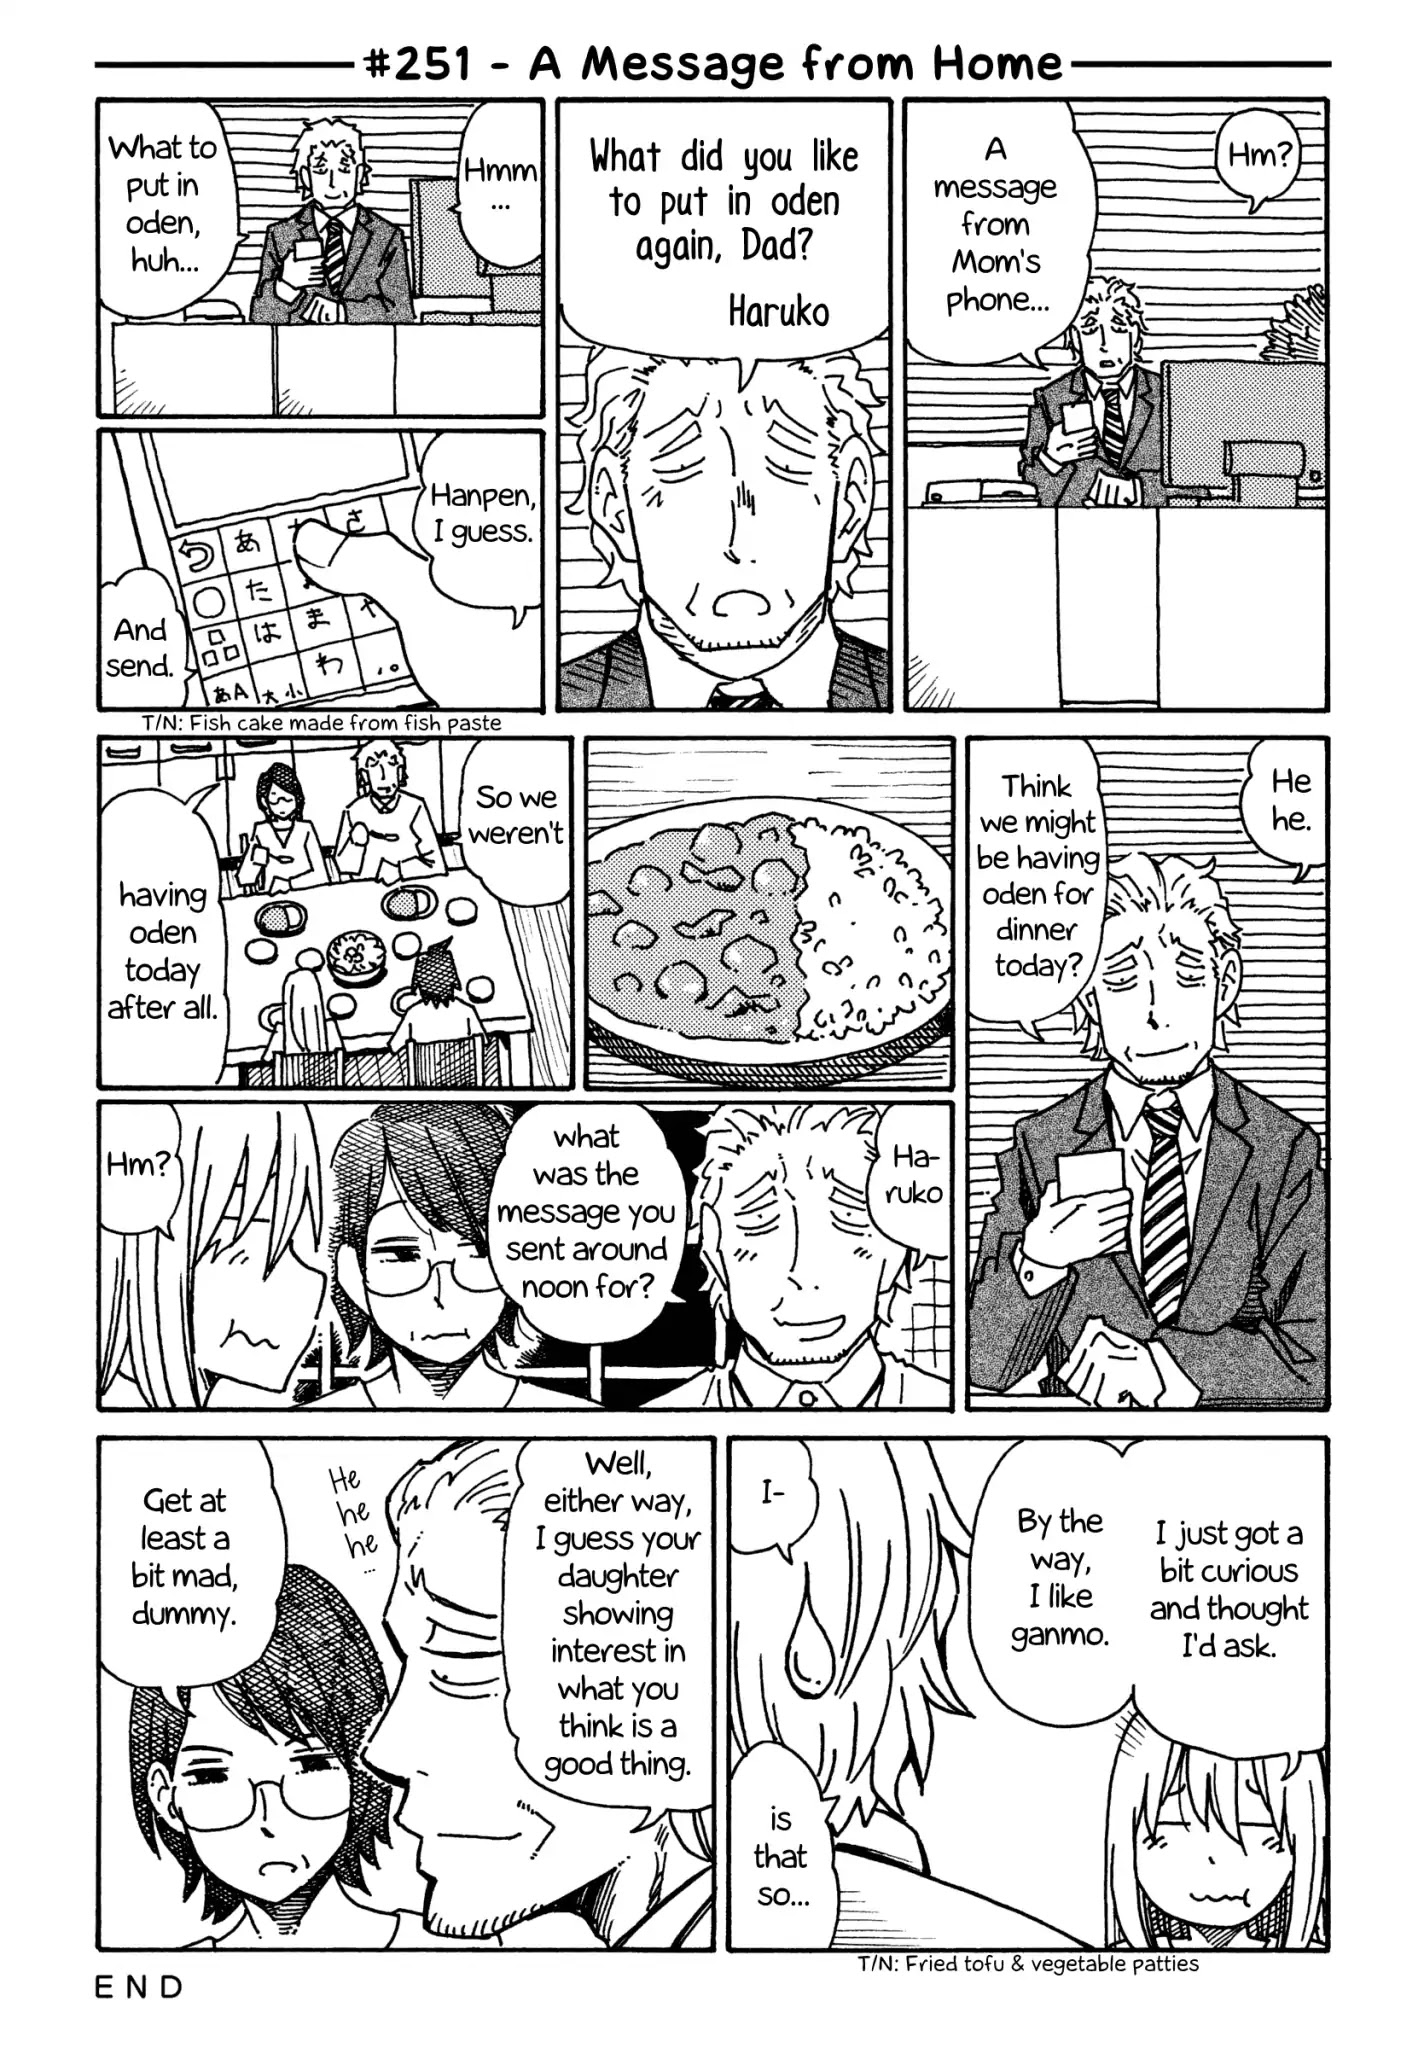 Hatarakanai Futari (The Jobless Siblings) Chapter 251: A Message From Home